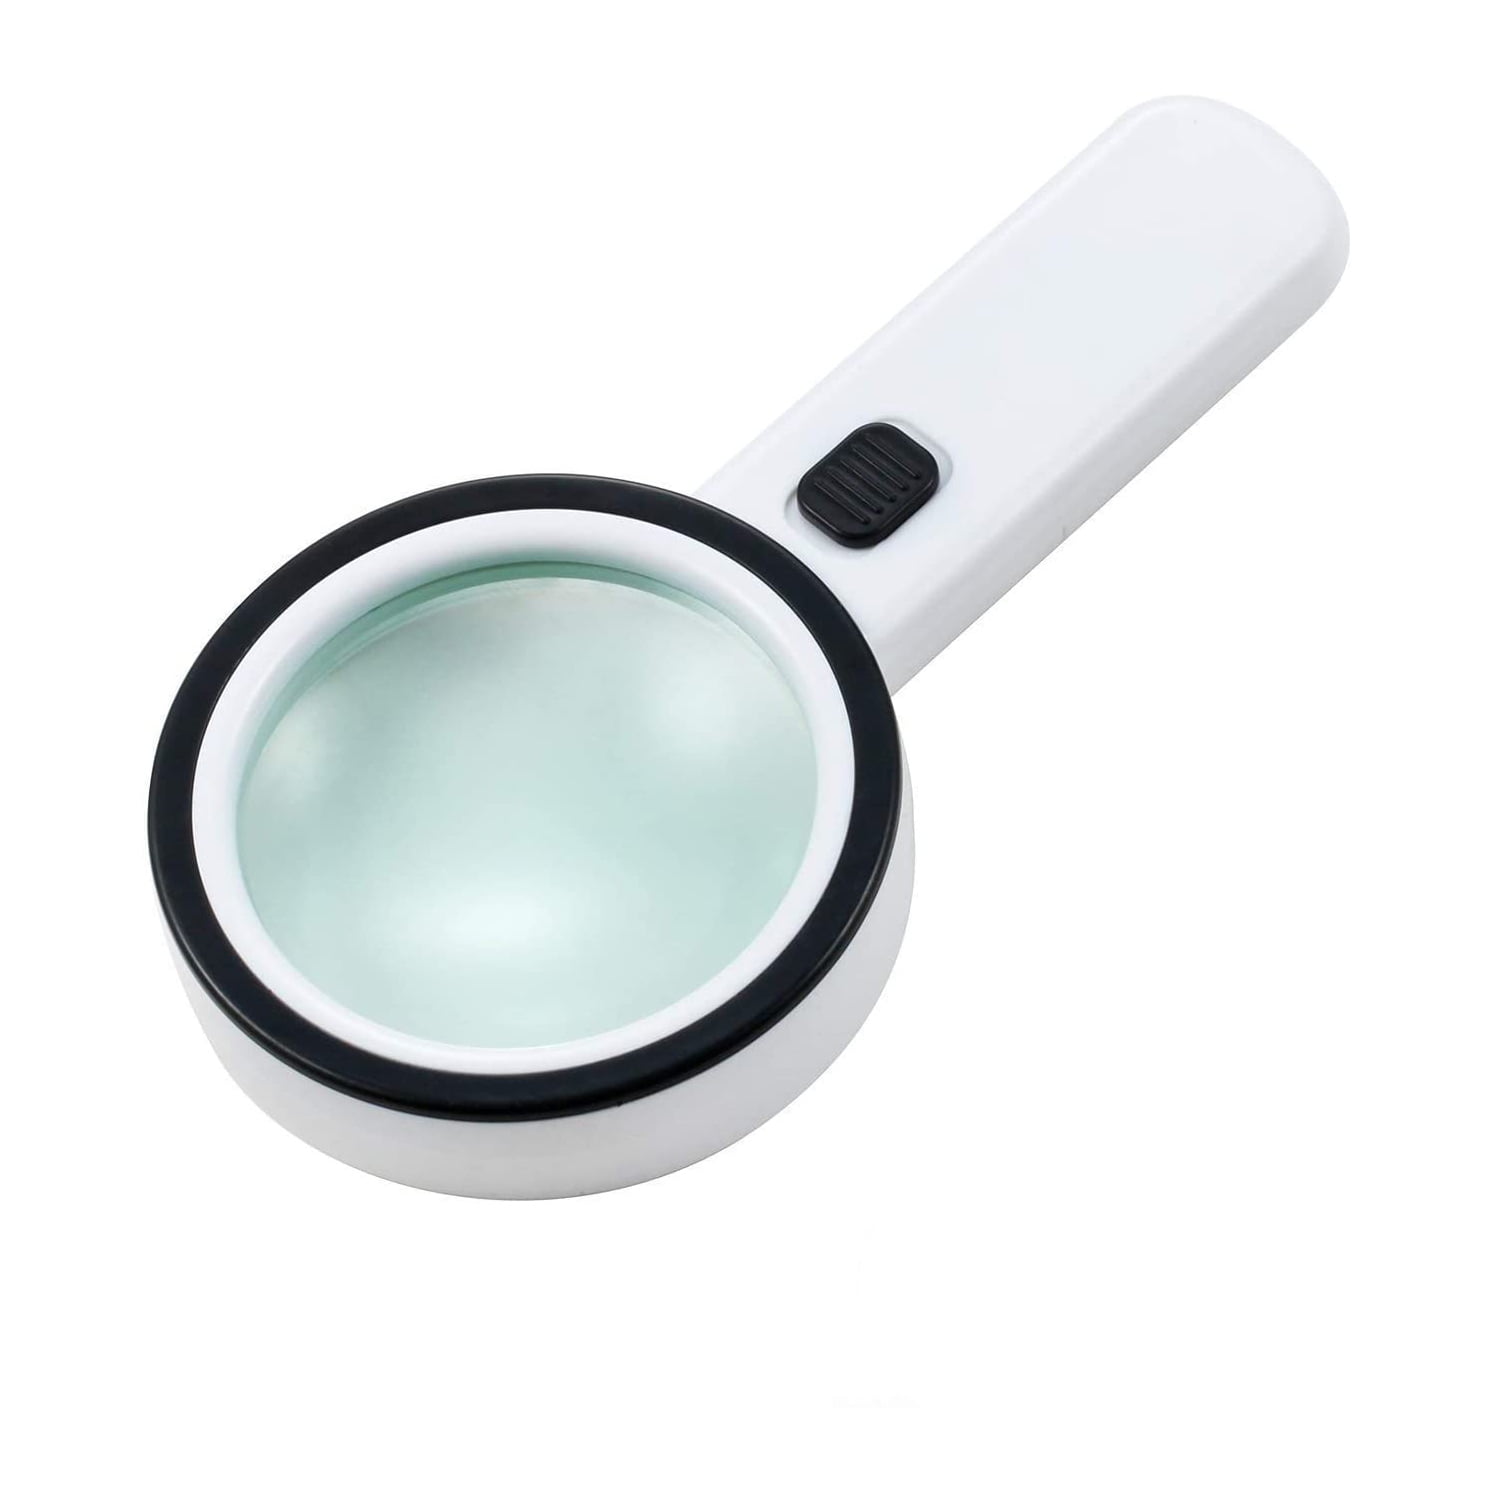 Professional Magnifying Glass with Light,Lighted Magnifier for Reading Books with 12 LED 6X Glass Lens,Large Handheld Illuminated Magnifying Lens for Kids Seniors Low Vision Macular Degeneration 